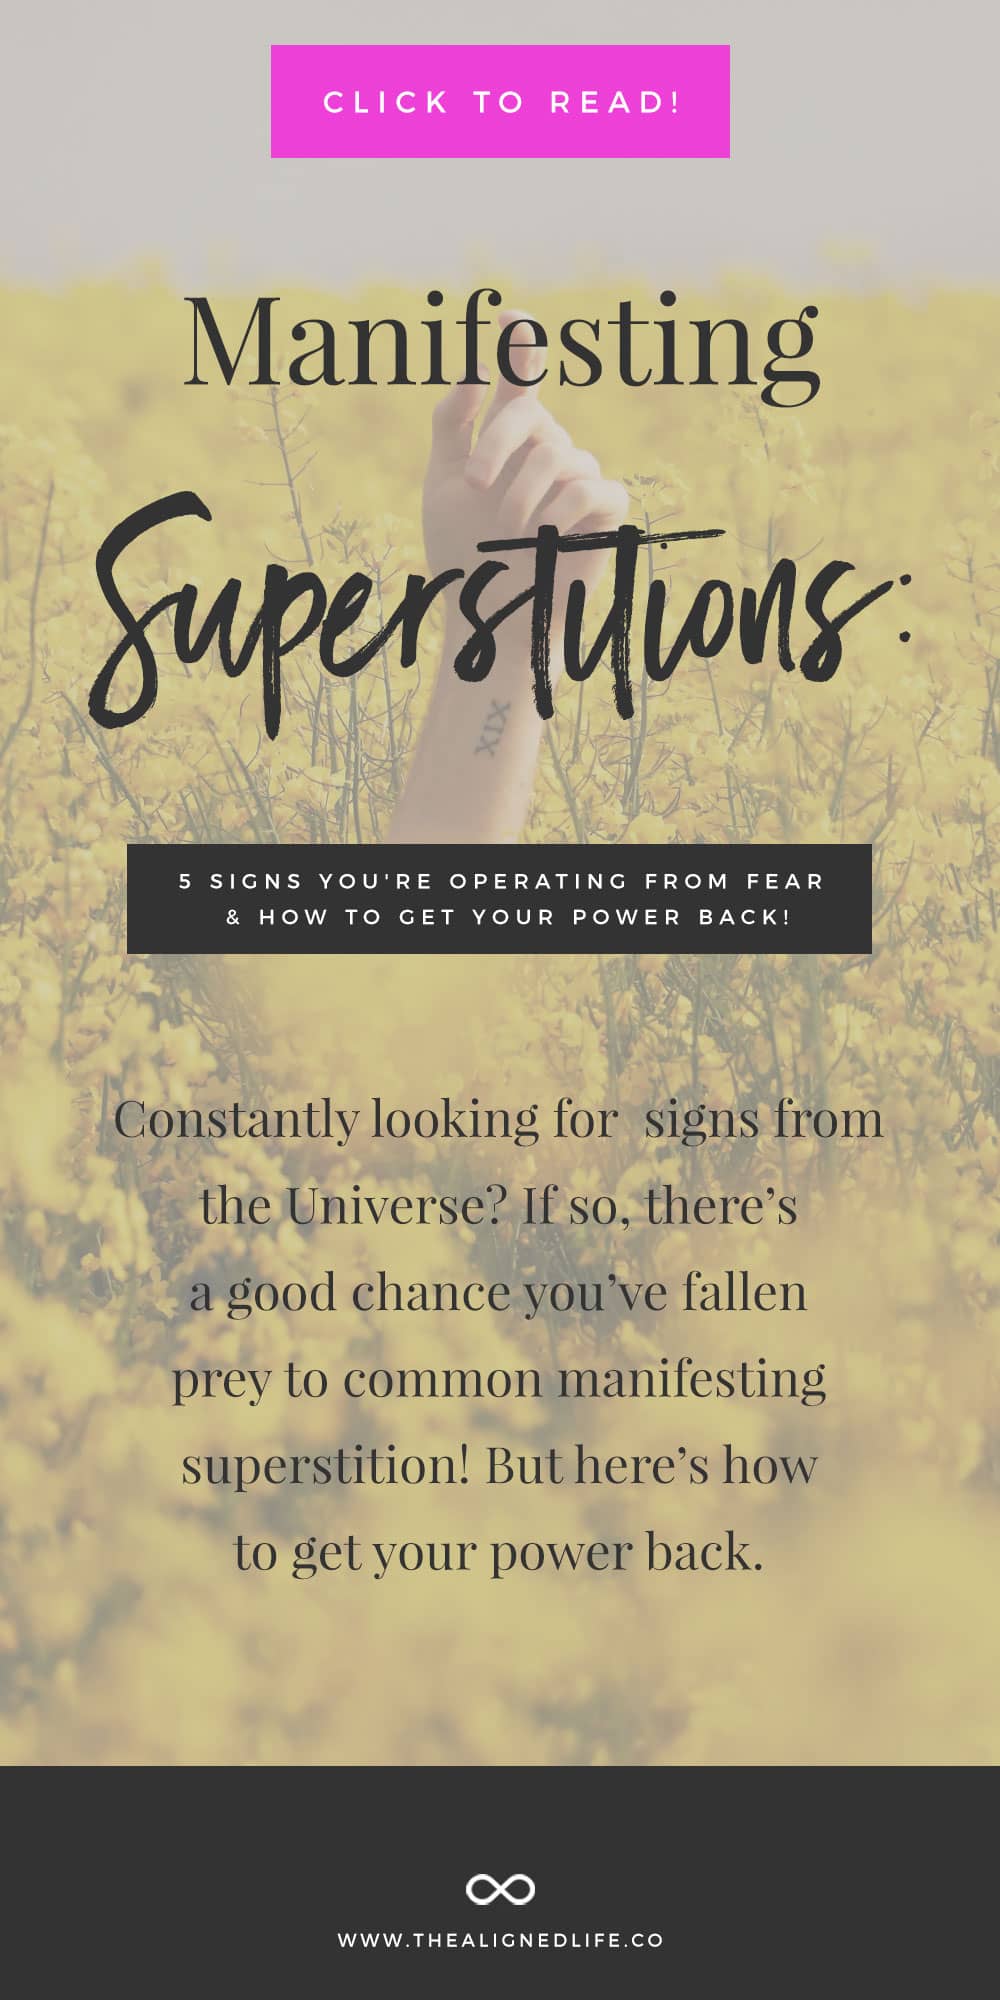 Manifesting Superstitions: 5 Signs You're Operating From Fear & How To Get Your Power Back!